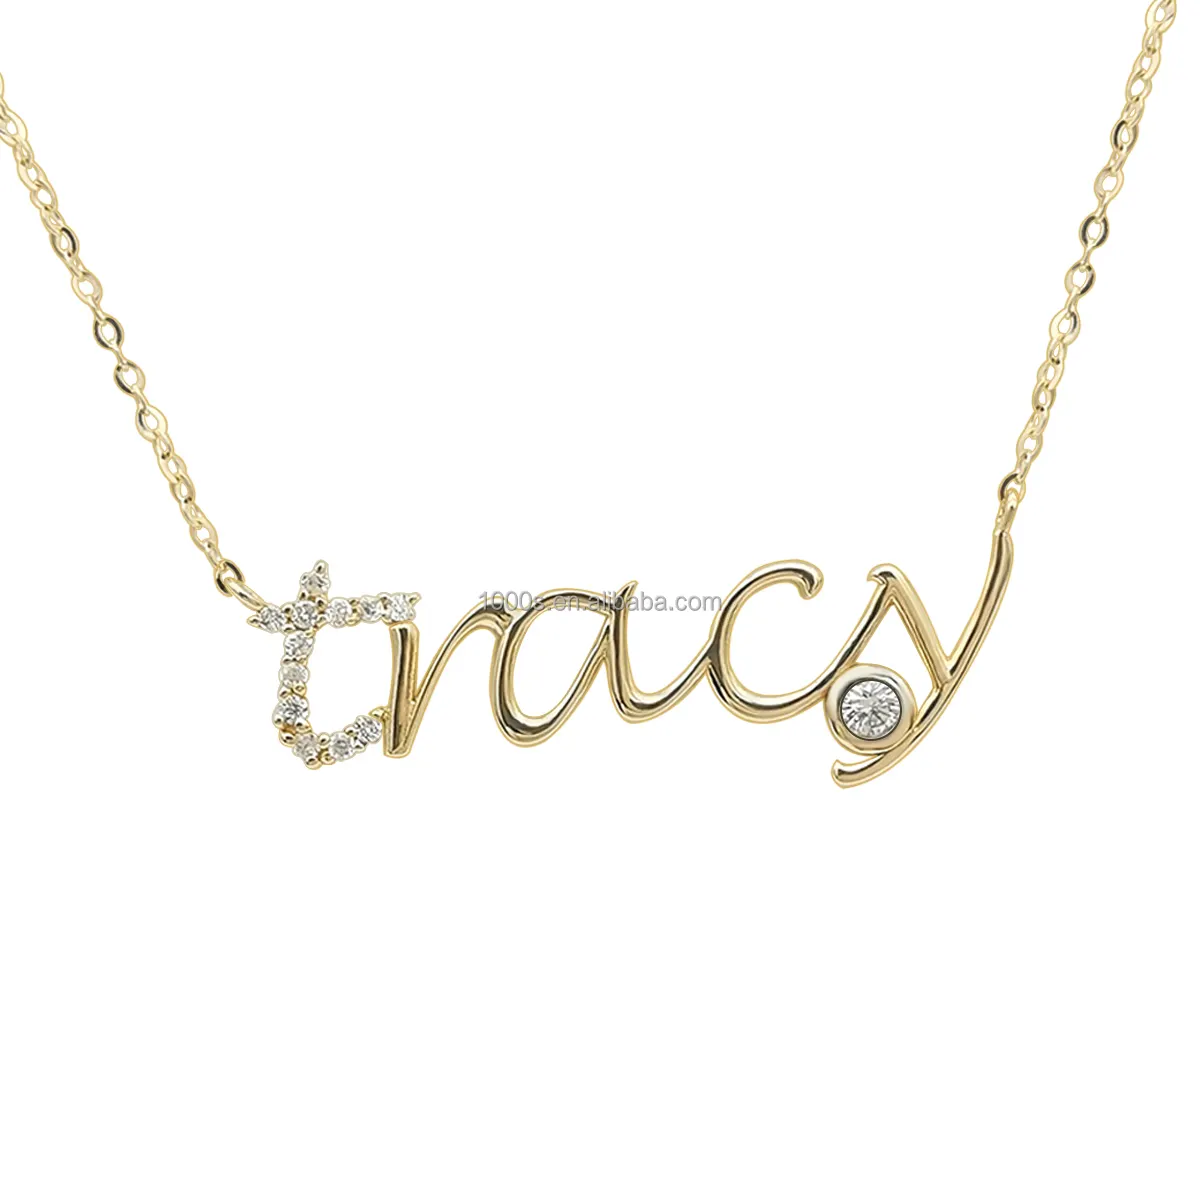 Fashion Unique Design Custom 9K 14K 18K Solid Gold Letter Name Chain Necklace Jewelry